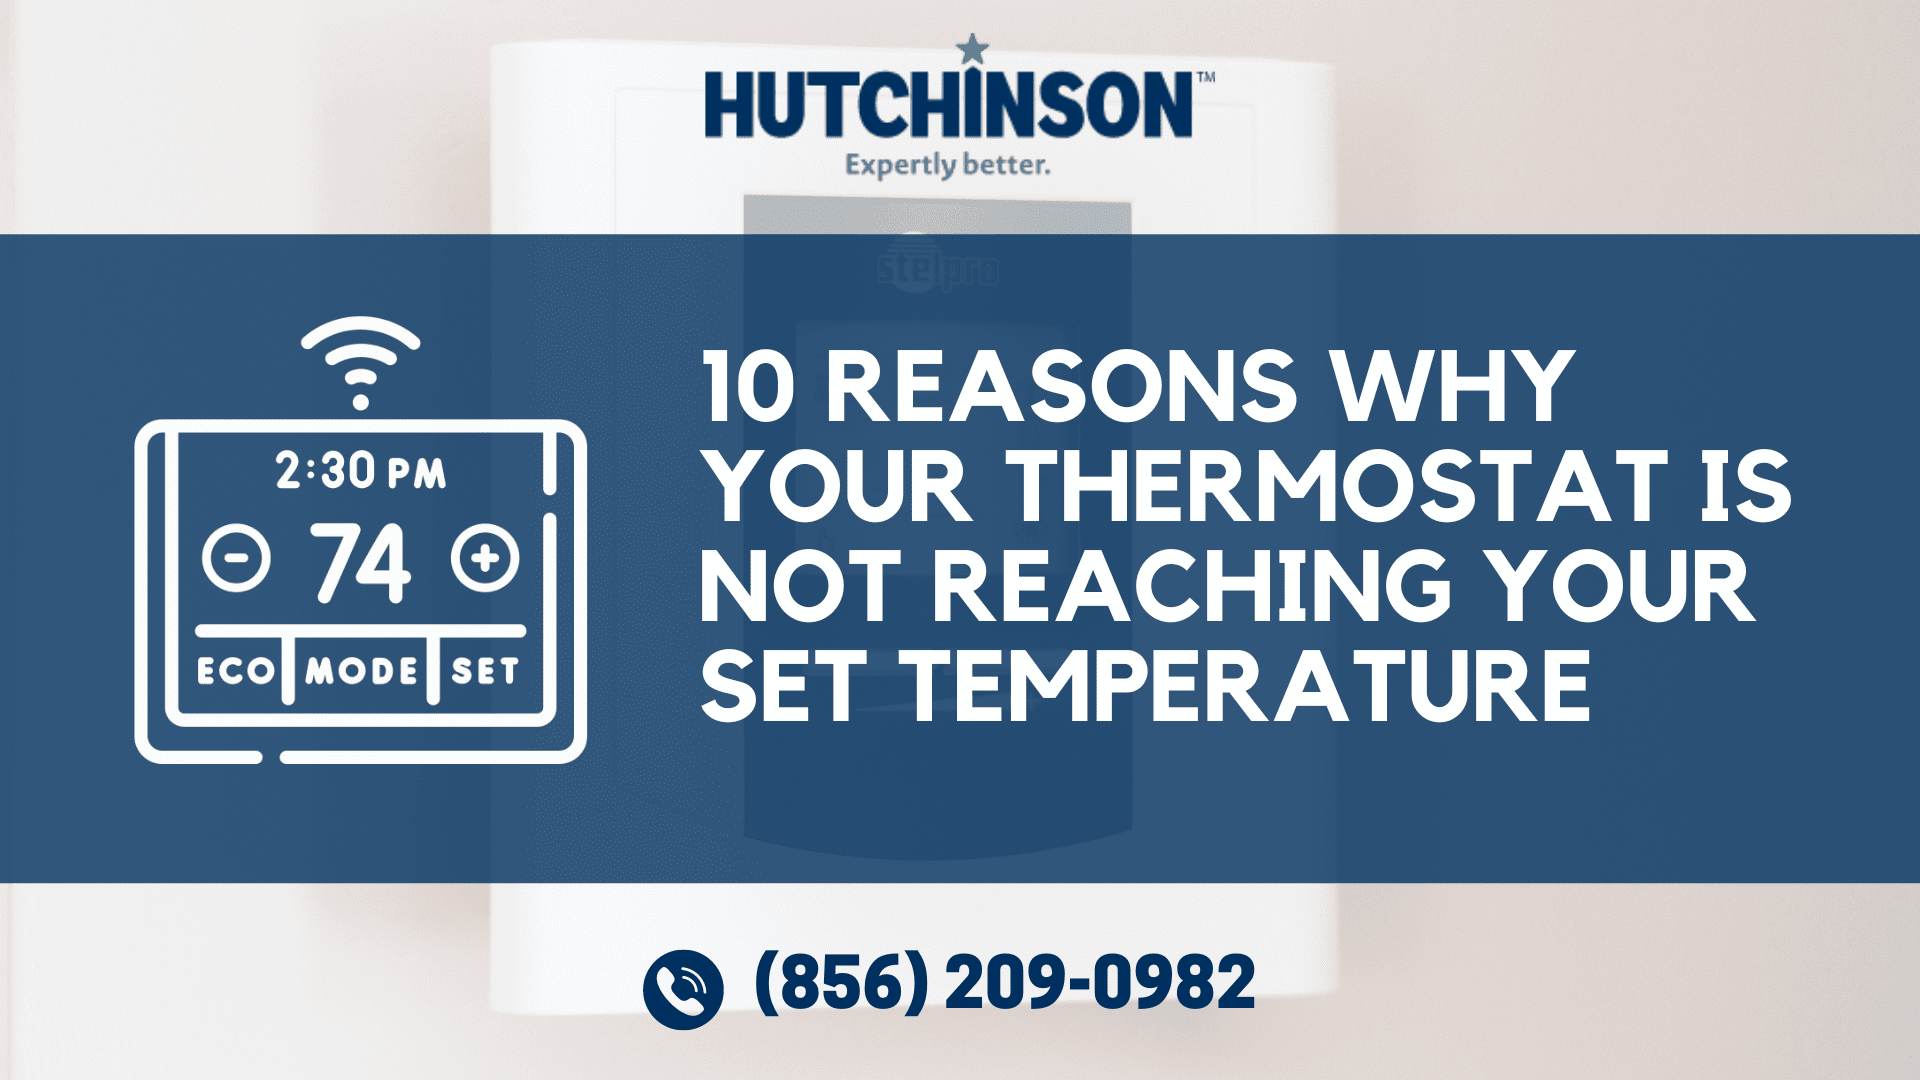 10 Reasons Why Your Thermostat Is Not Reaching Your Set Temperature